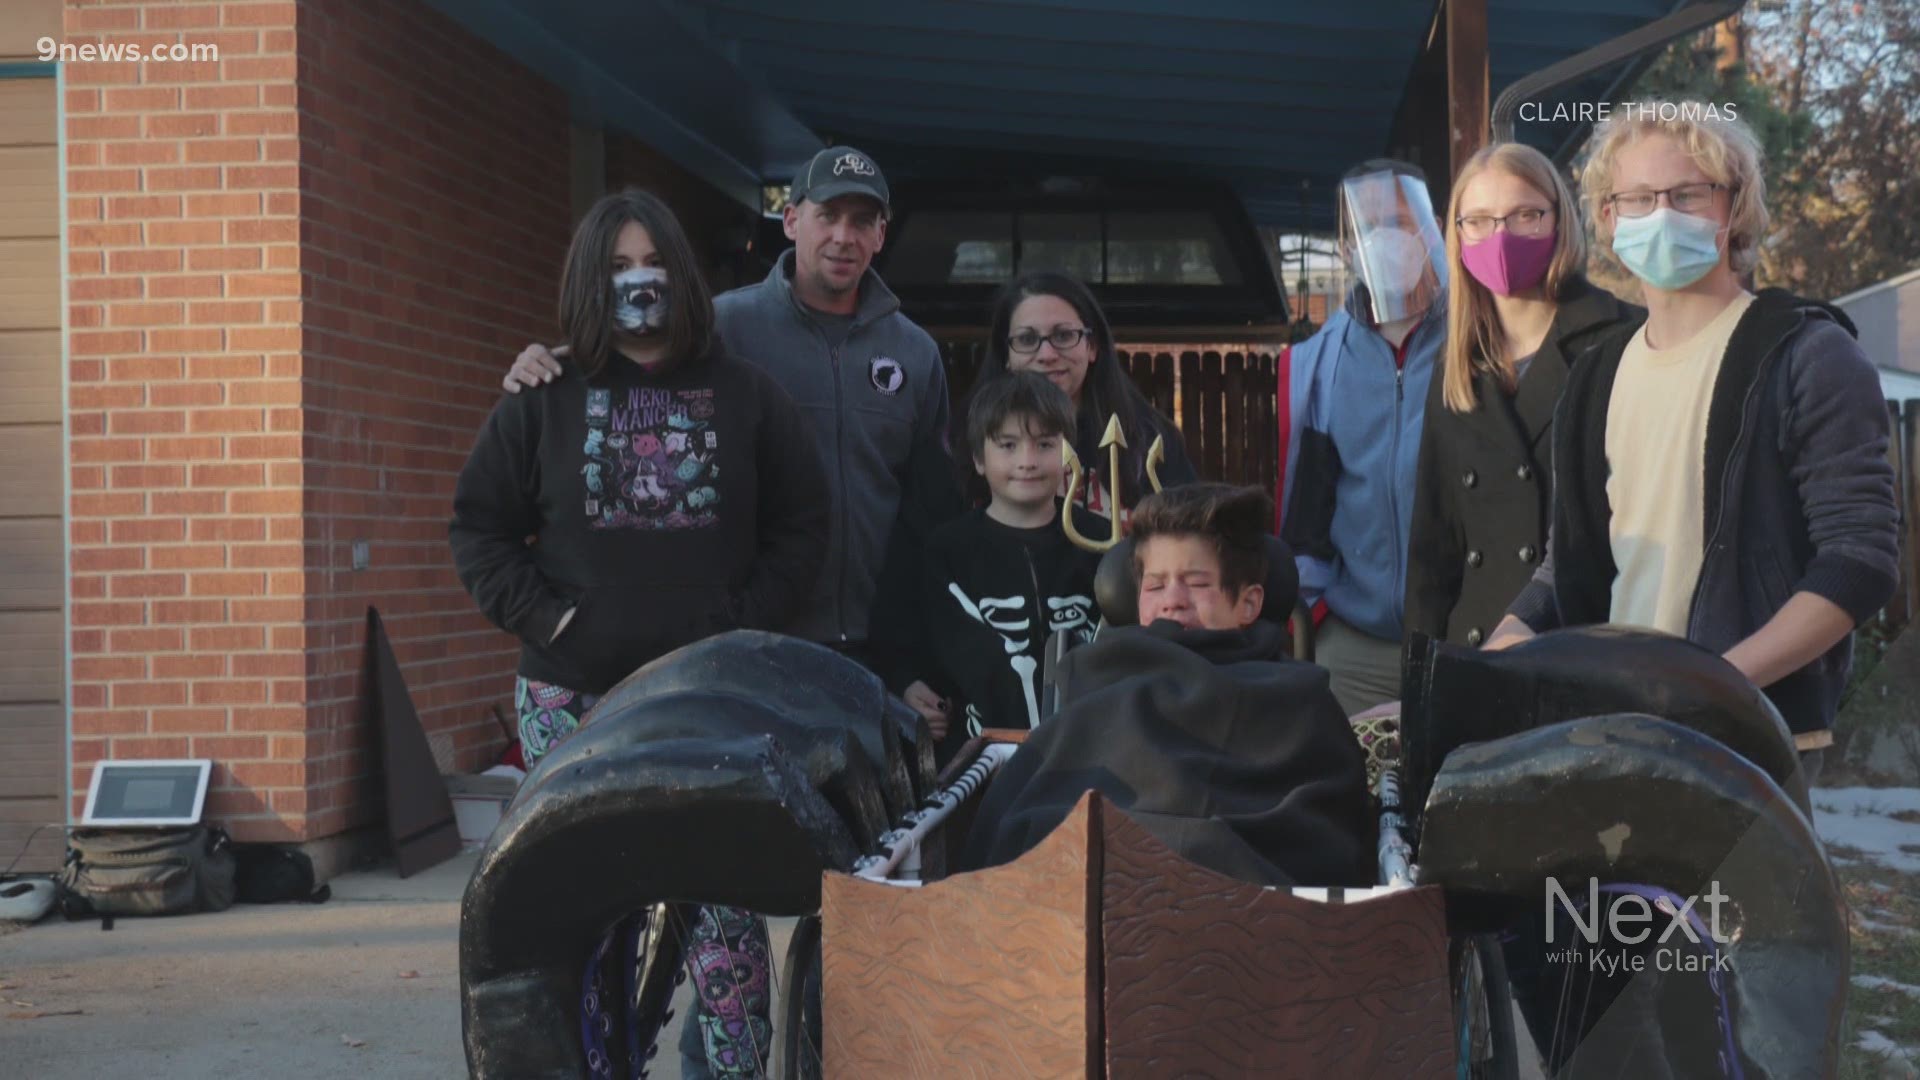 The Colorado School of Mines Maker Society created this one-of-a-kind ode to the Little Mermaid as part of their annual Magic Wheelchair Halloween build.